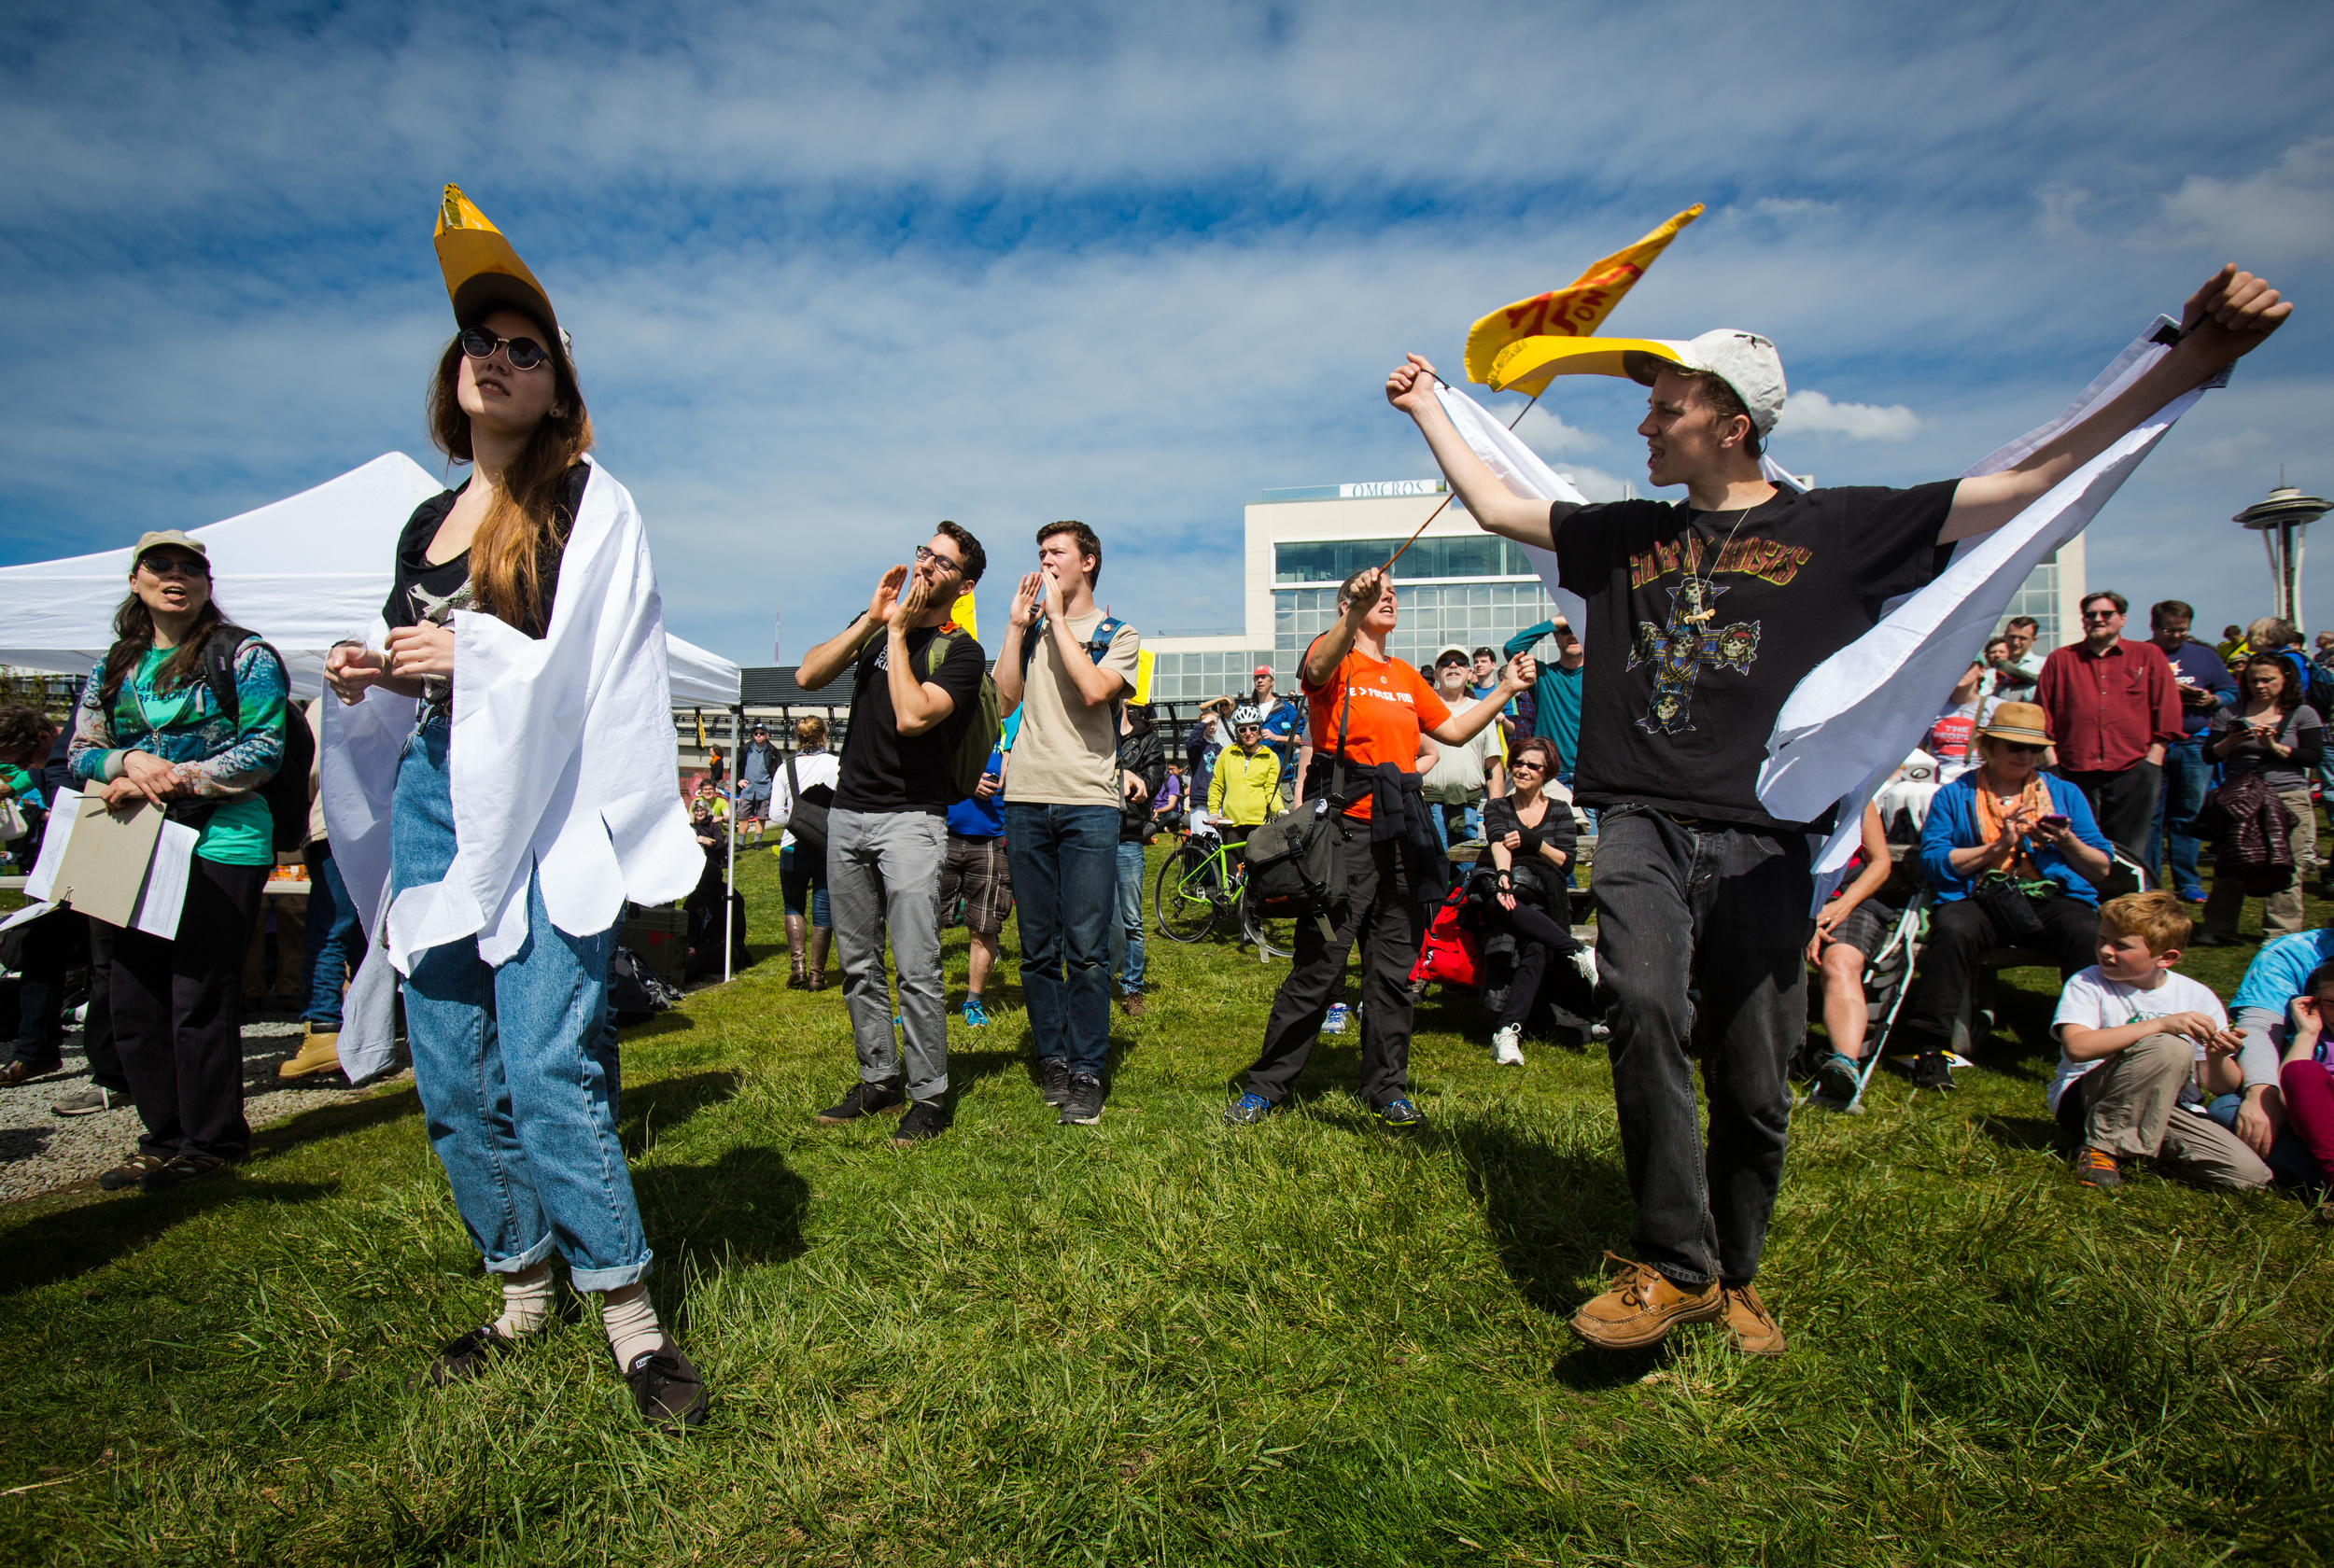   Reve Hansen and Whealon Costello dance in seagull hats and capes in protest against the planned arrival of Shell's oil drilling rig at Myrtle Edwards Park on Sunday, April 26, 2015. Hundreds gathered for the "Shell No: Seattle Draws the Line" prote